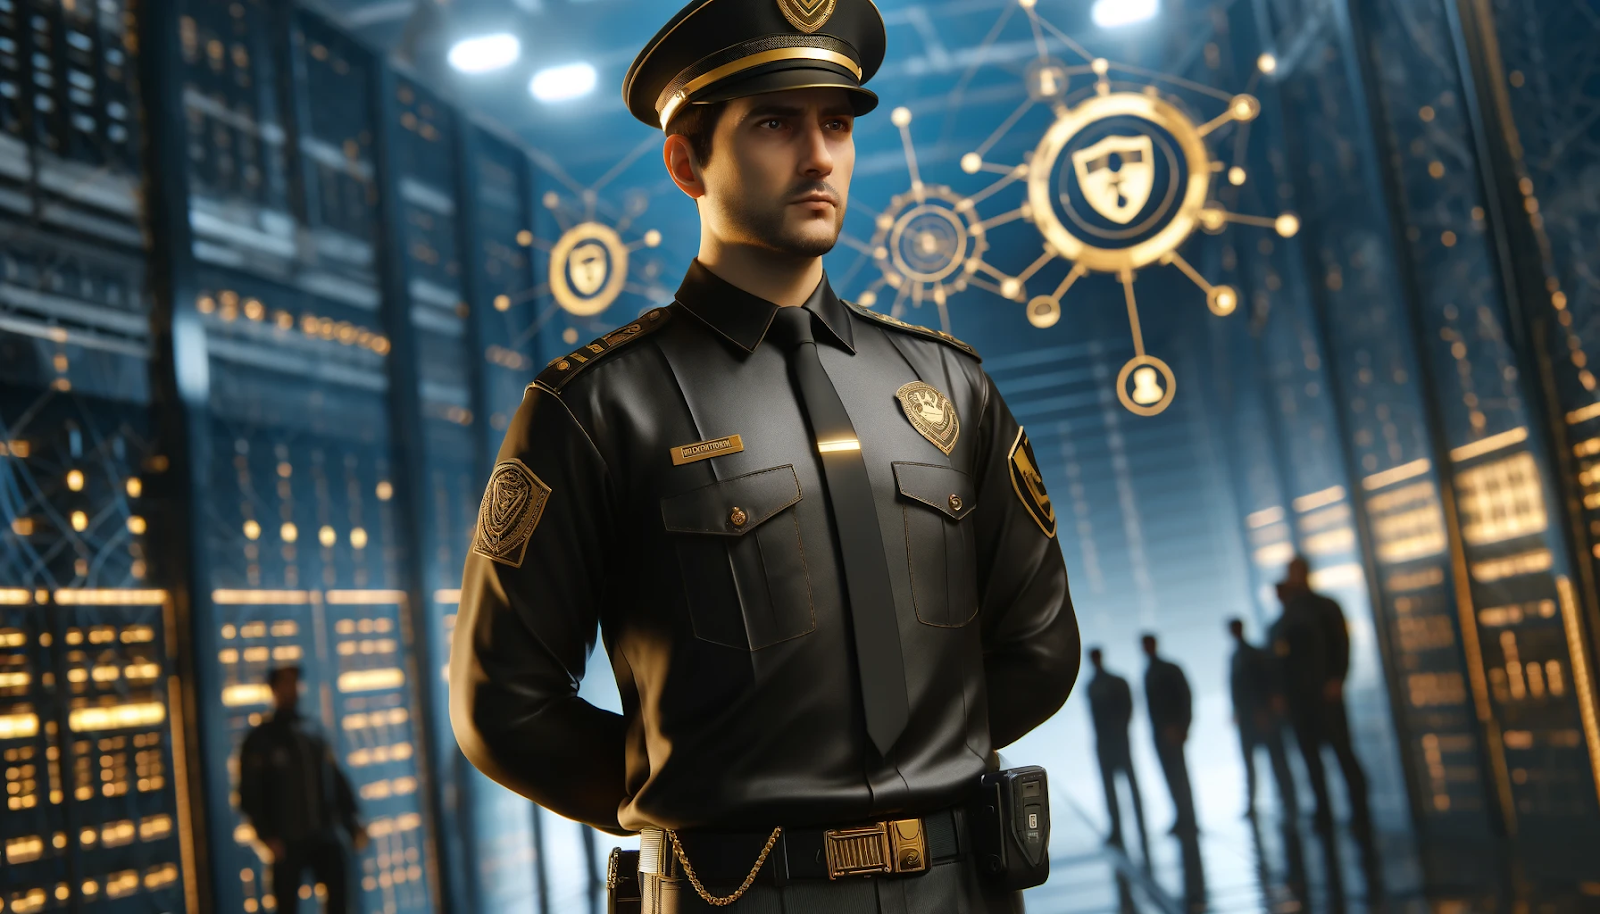 This is a photorealistic image symbolizing fatigue management in security personnel. It features a security guard in a black and gold uniform looking alert amidst a backdrop of a secure facility.  